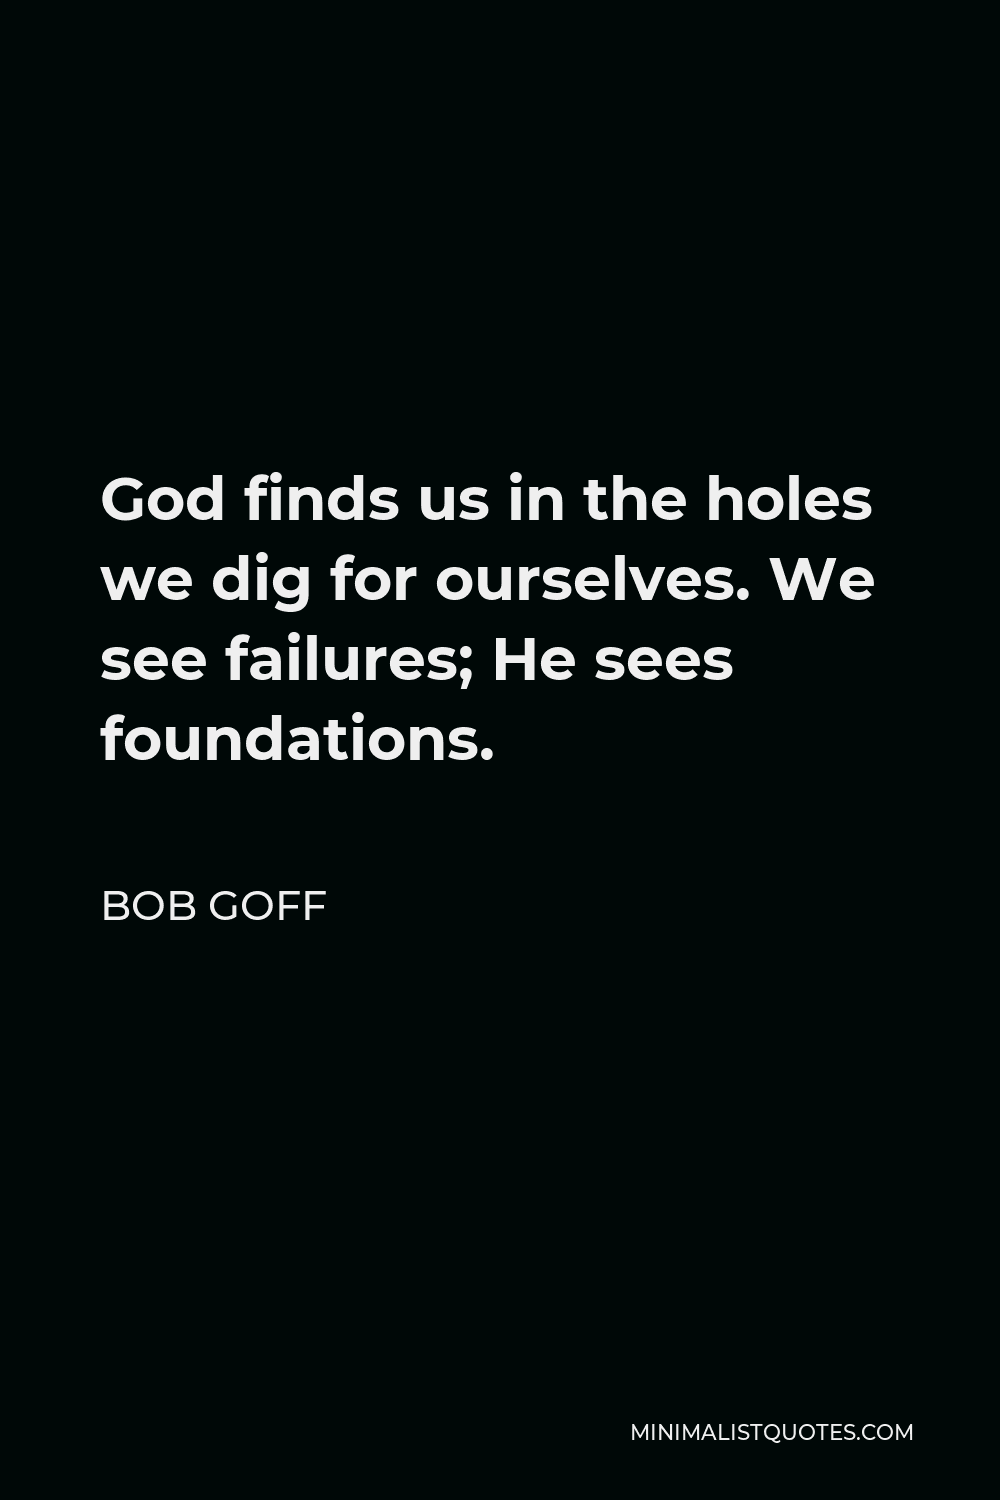 Bob Goff Quote - God finds us in the holes we dig for ourselves. We see failures; He sees foundations.